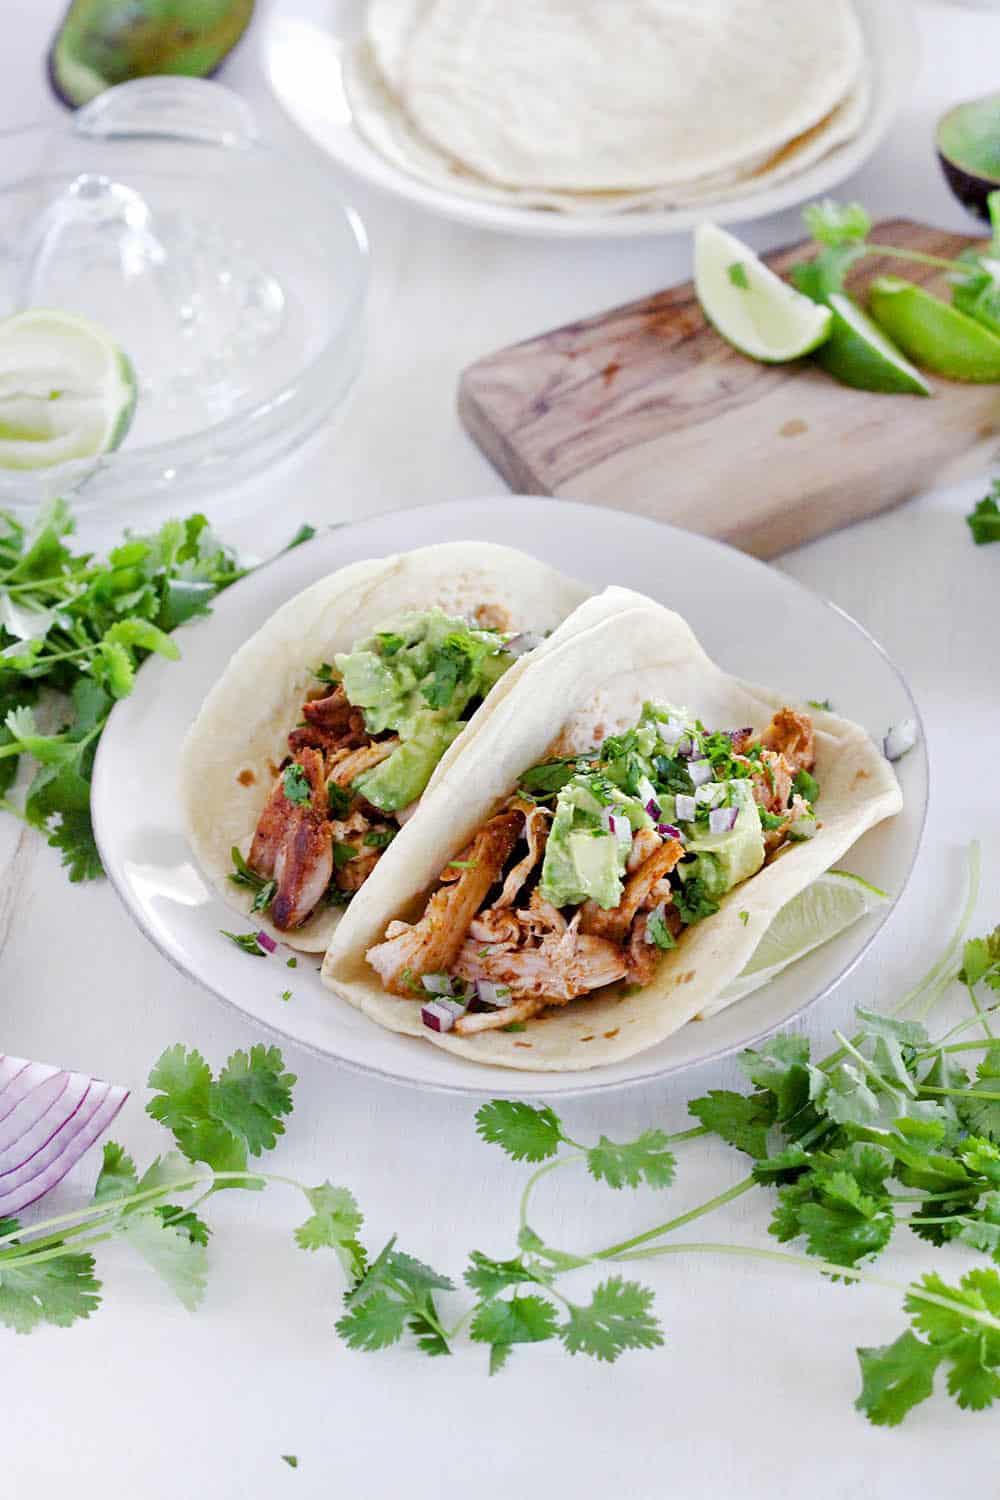 These smoky chicken and avocado tacos come together in only 20 minutes! They'll be your new favorite easy weeknight recipe for taco night and the whole family will love them. #TacoTuesday #MexicanFood